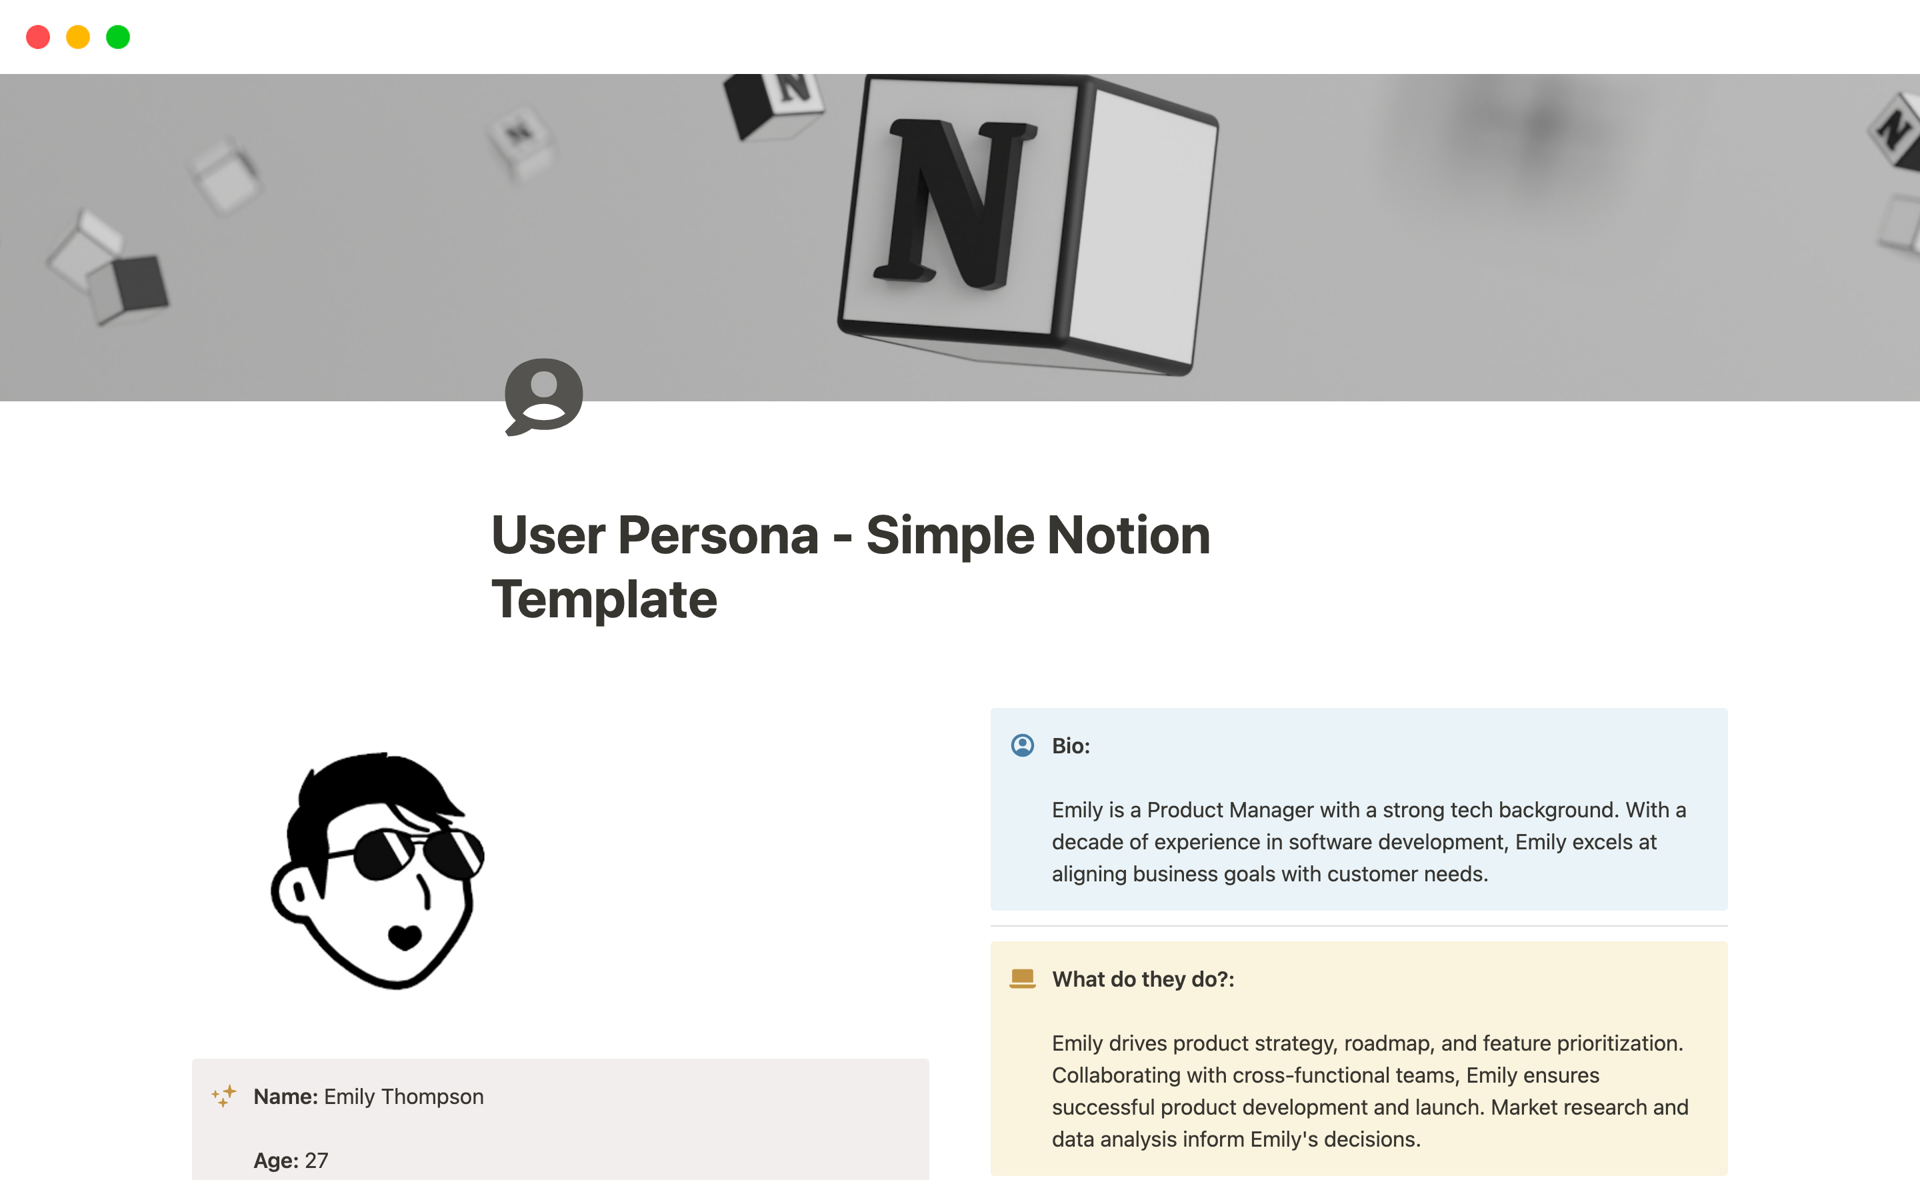 Effortlessly understand and connect with your target audience using our intuitive User Persona Notion Template.